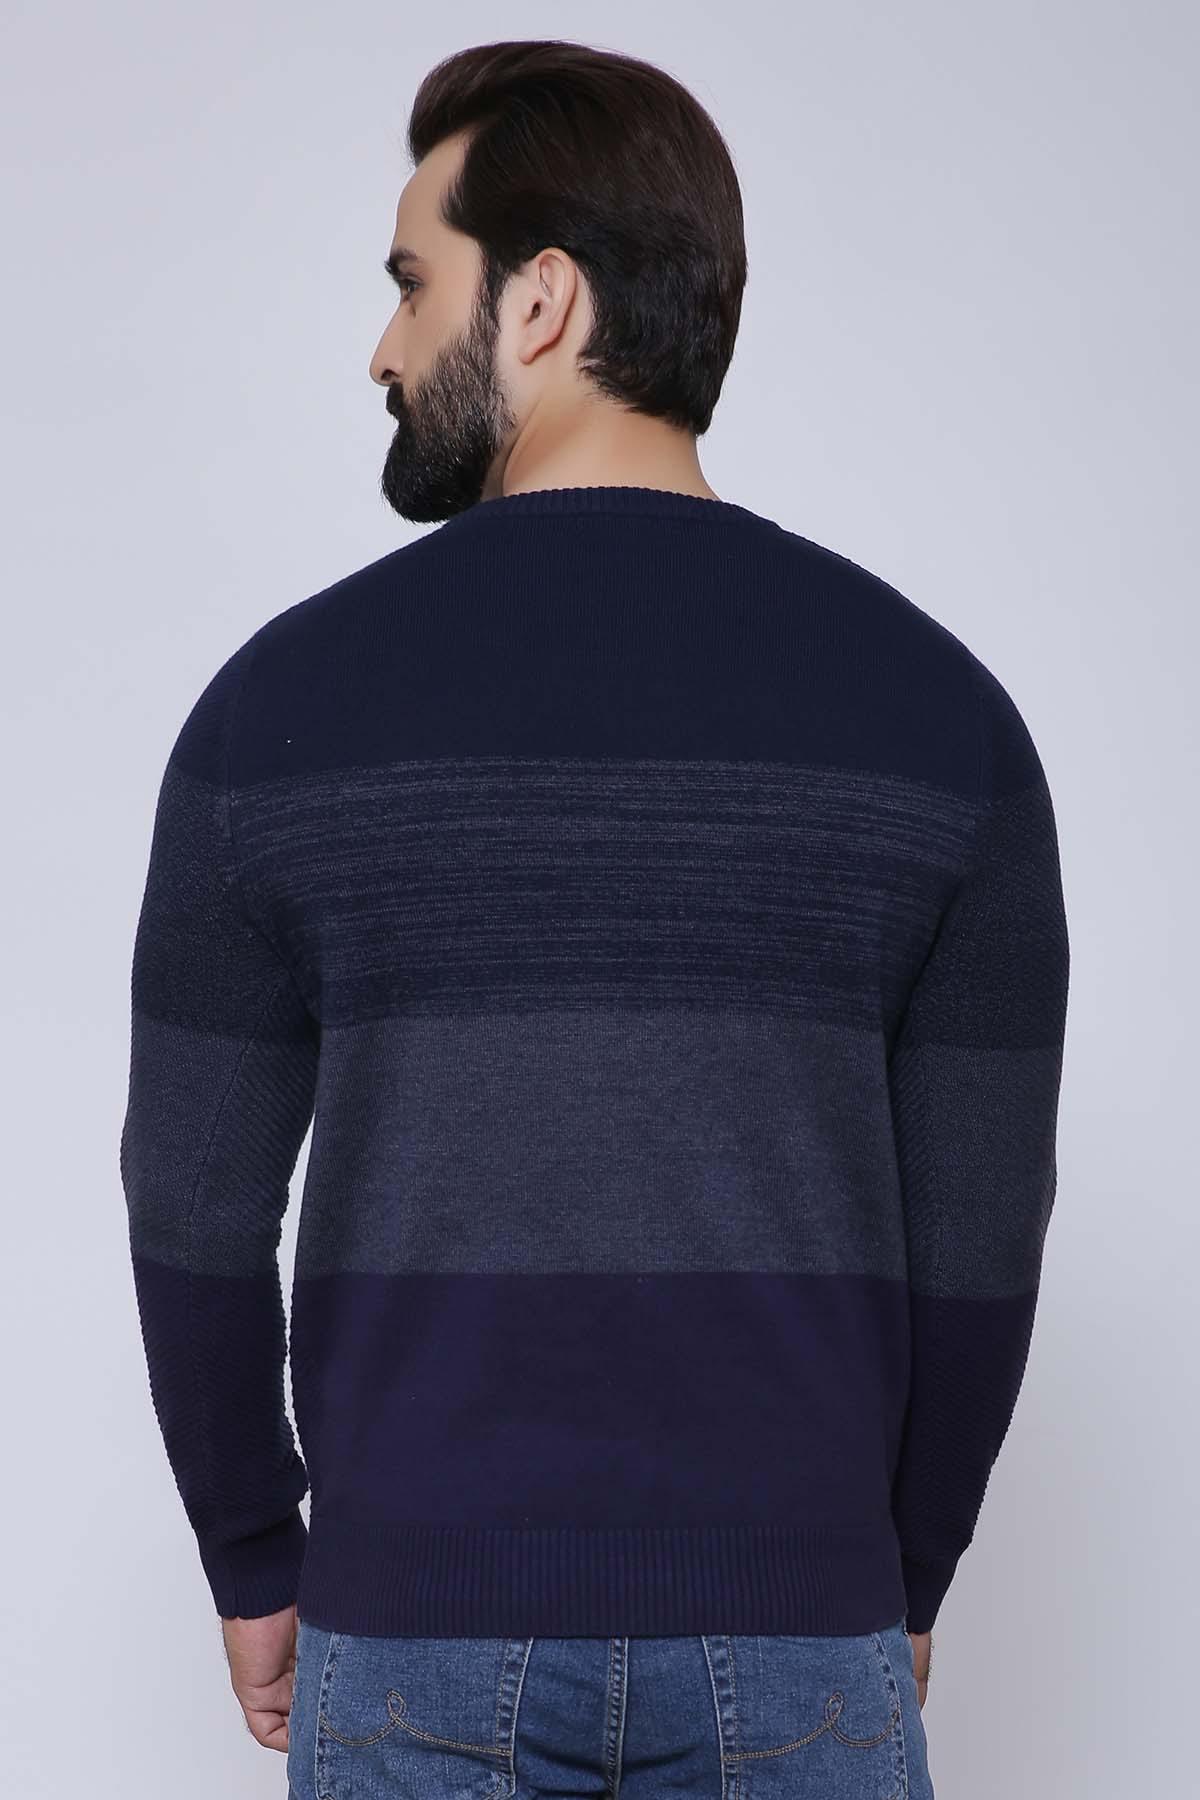 SWEATER ROUND NECK FULL NAVY GREY at Charcoal Clothing